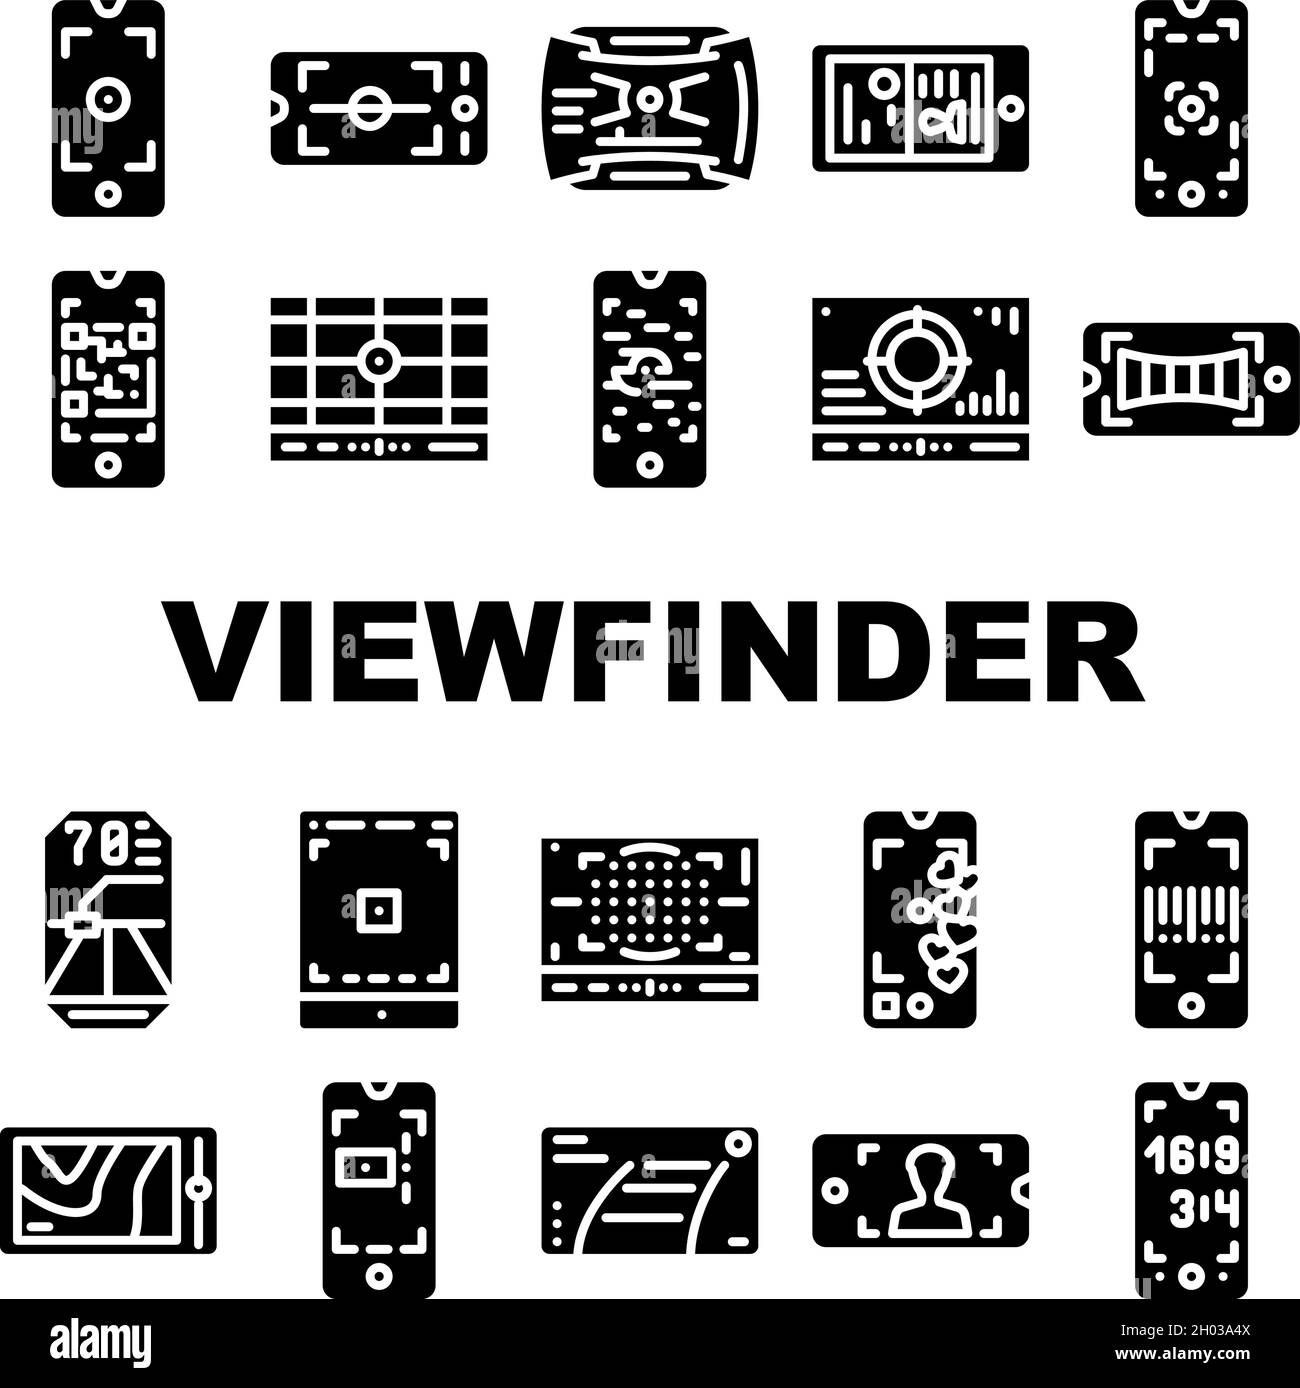 Viewfinder Smartphone Function Icons Set Vector Stock Vector